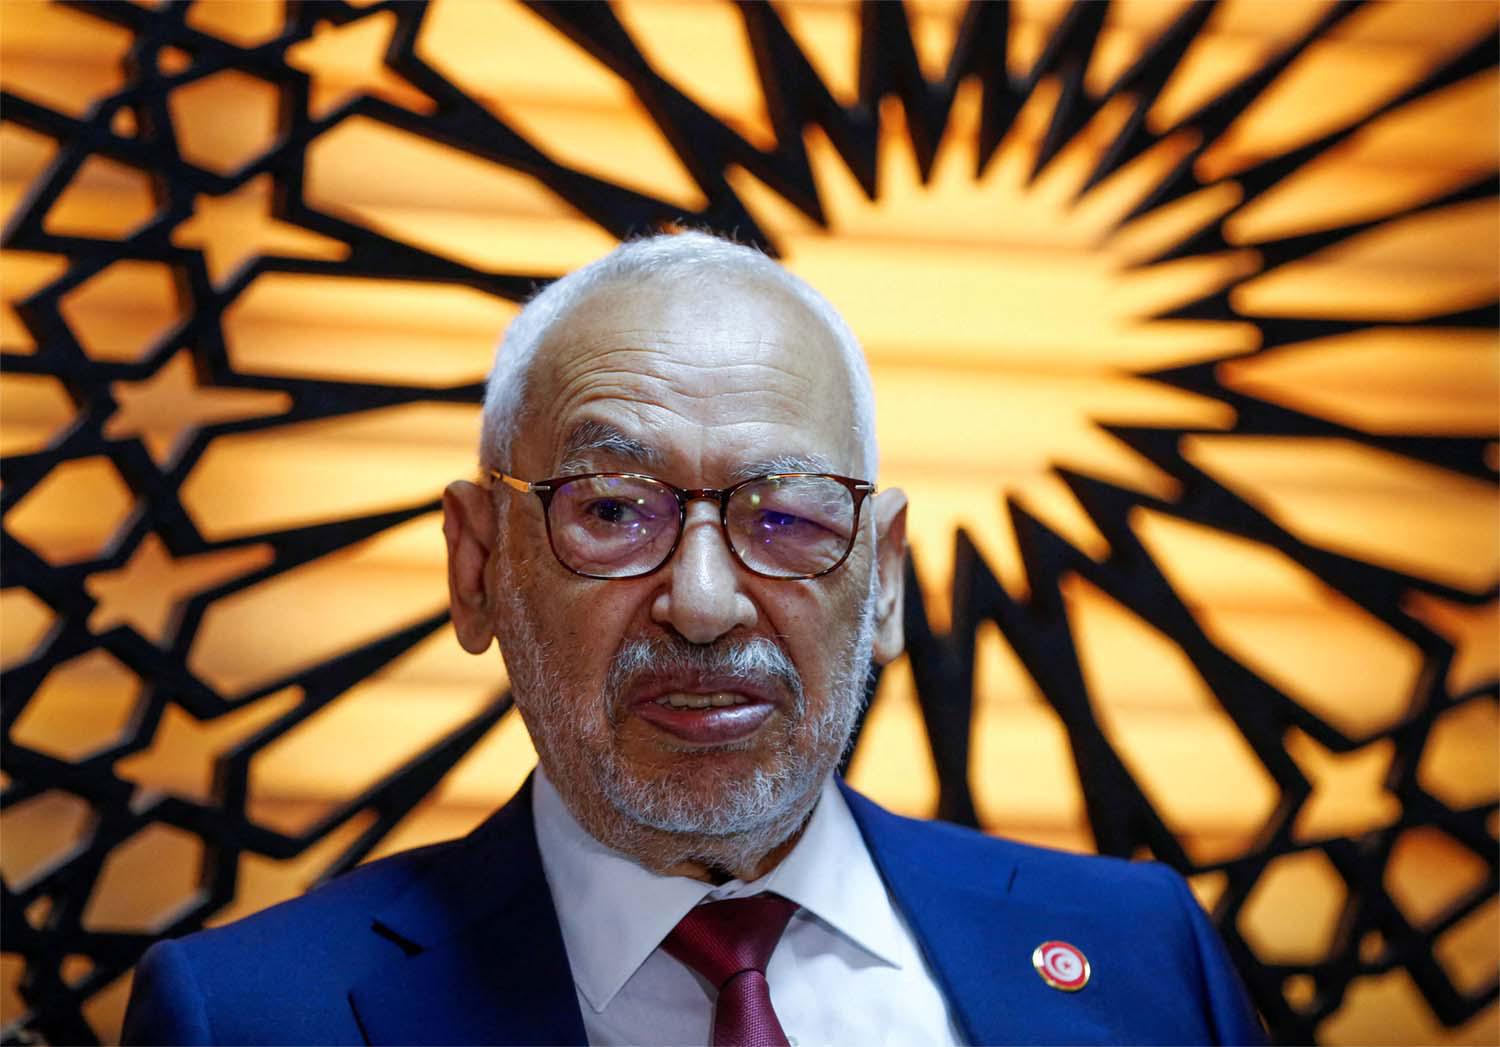 Ghannouchi's party has said the accusations are related to terrorism